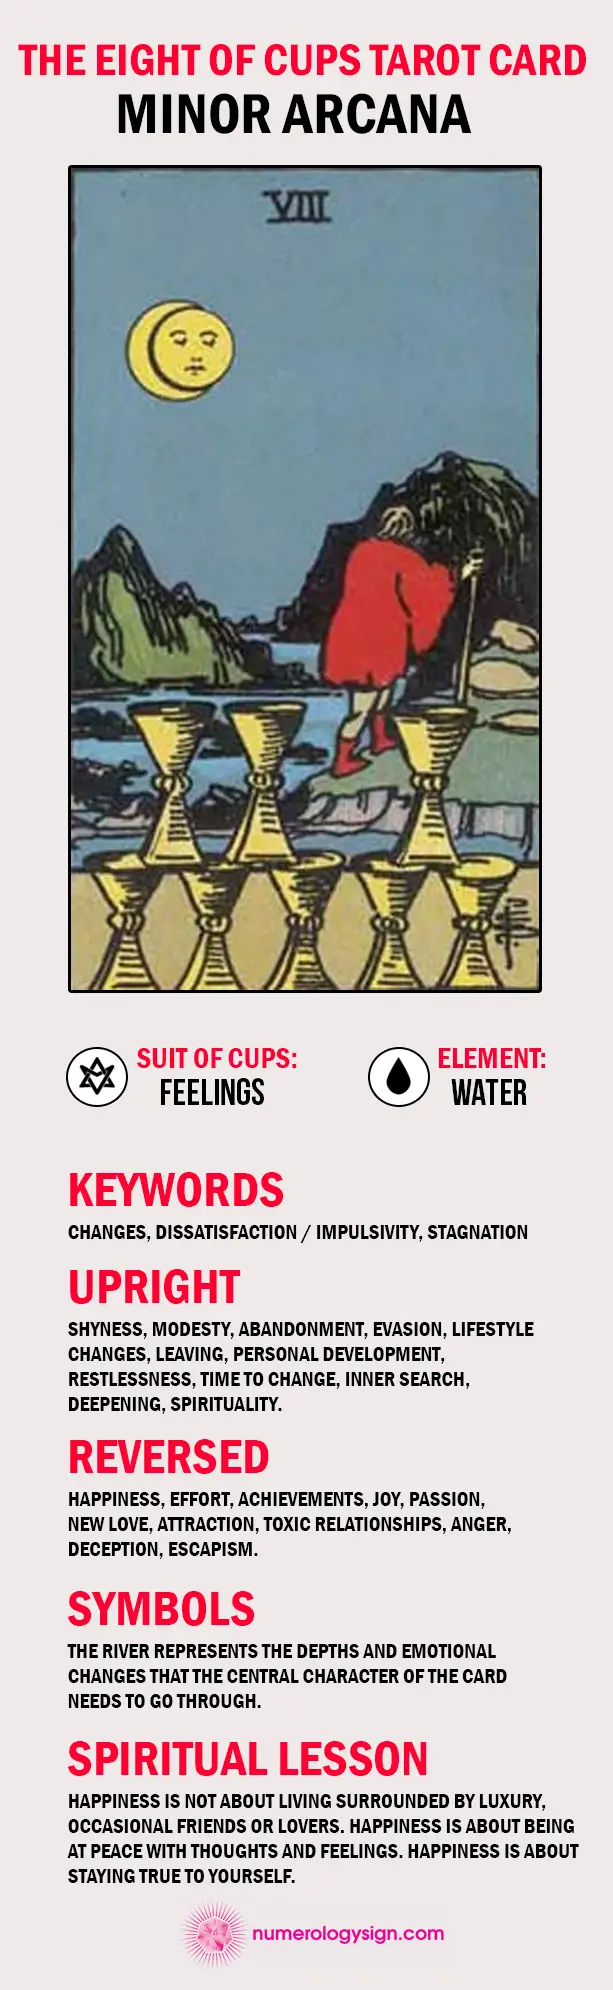 The Eight of Cups Tarot Card Meaning Infographic - Minor Arcana